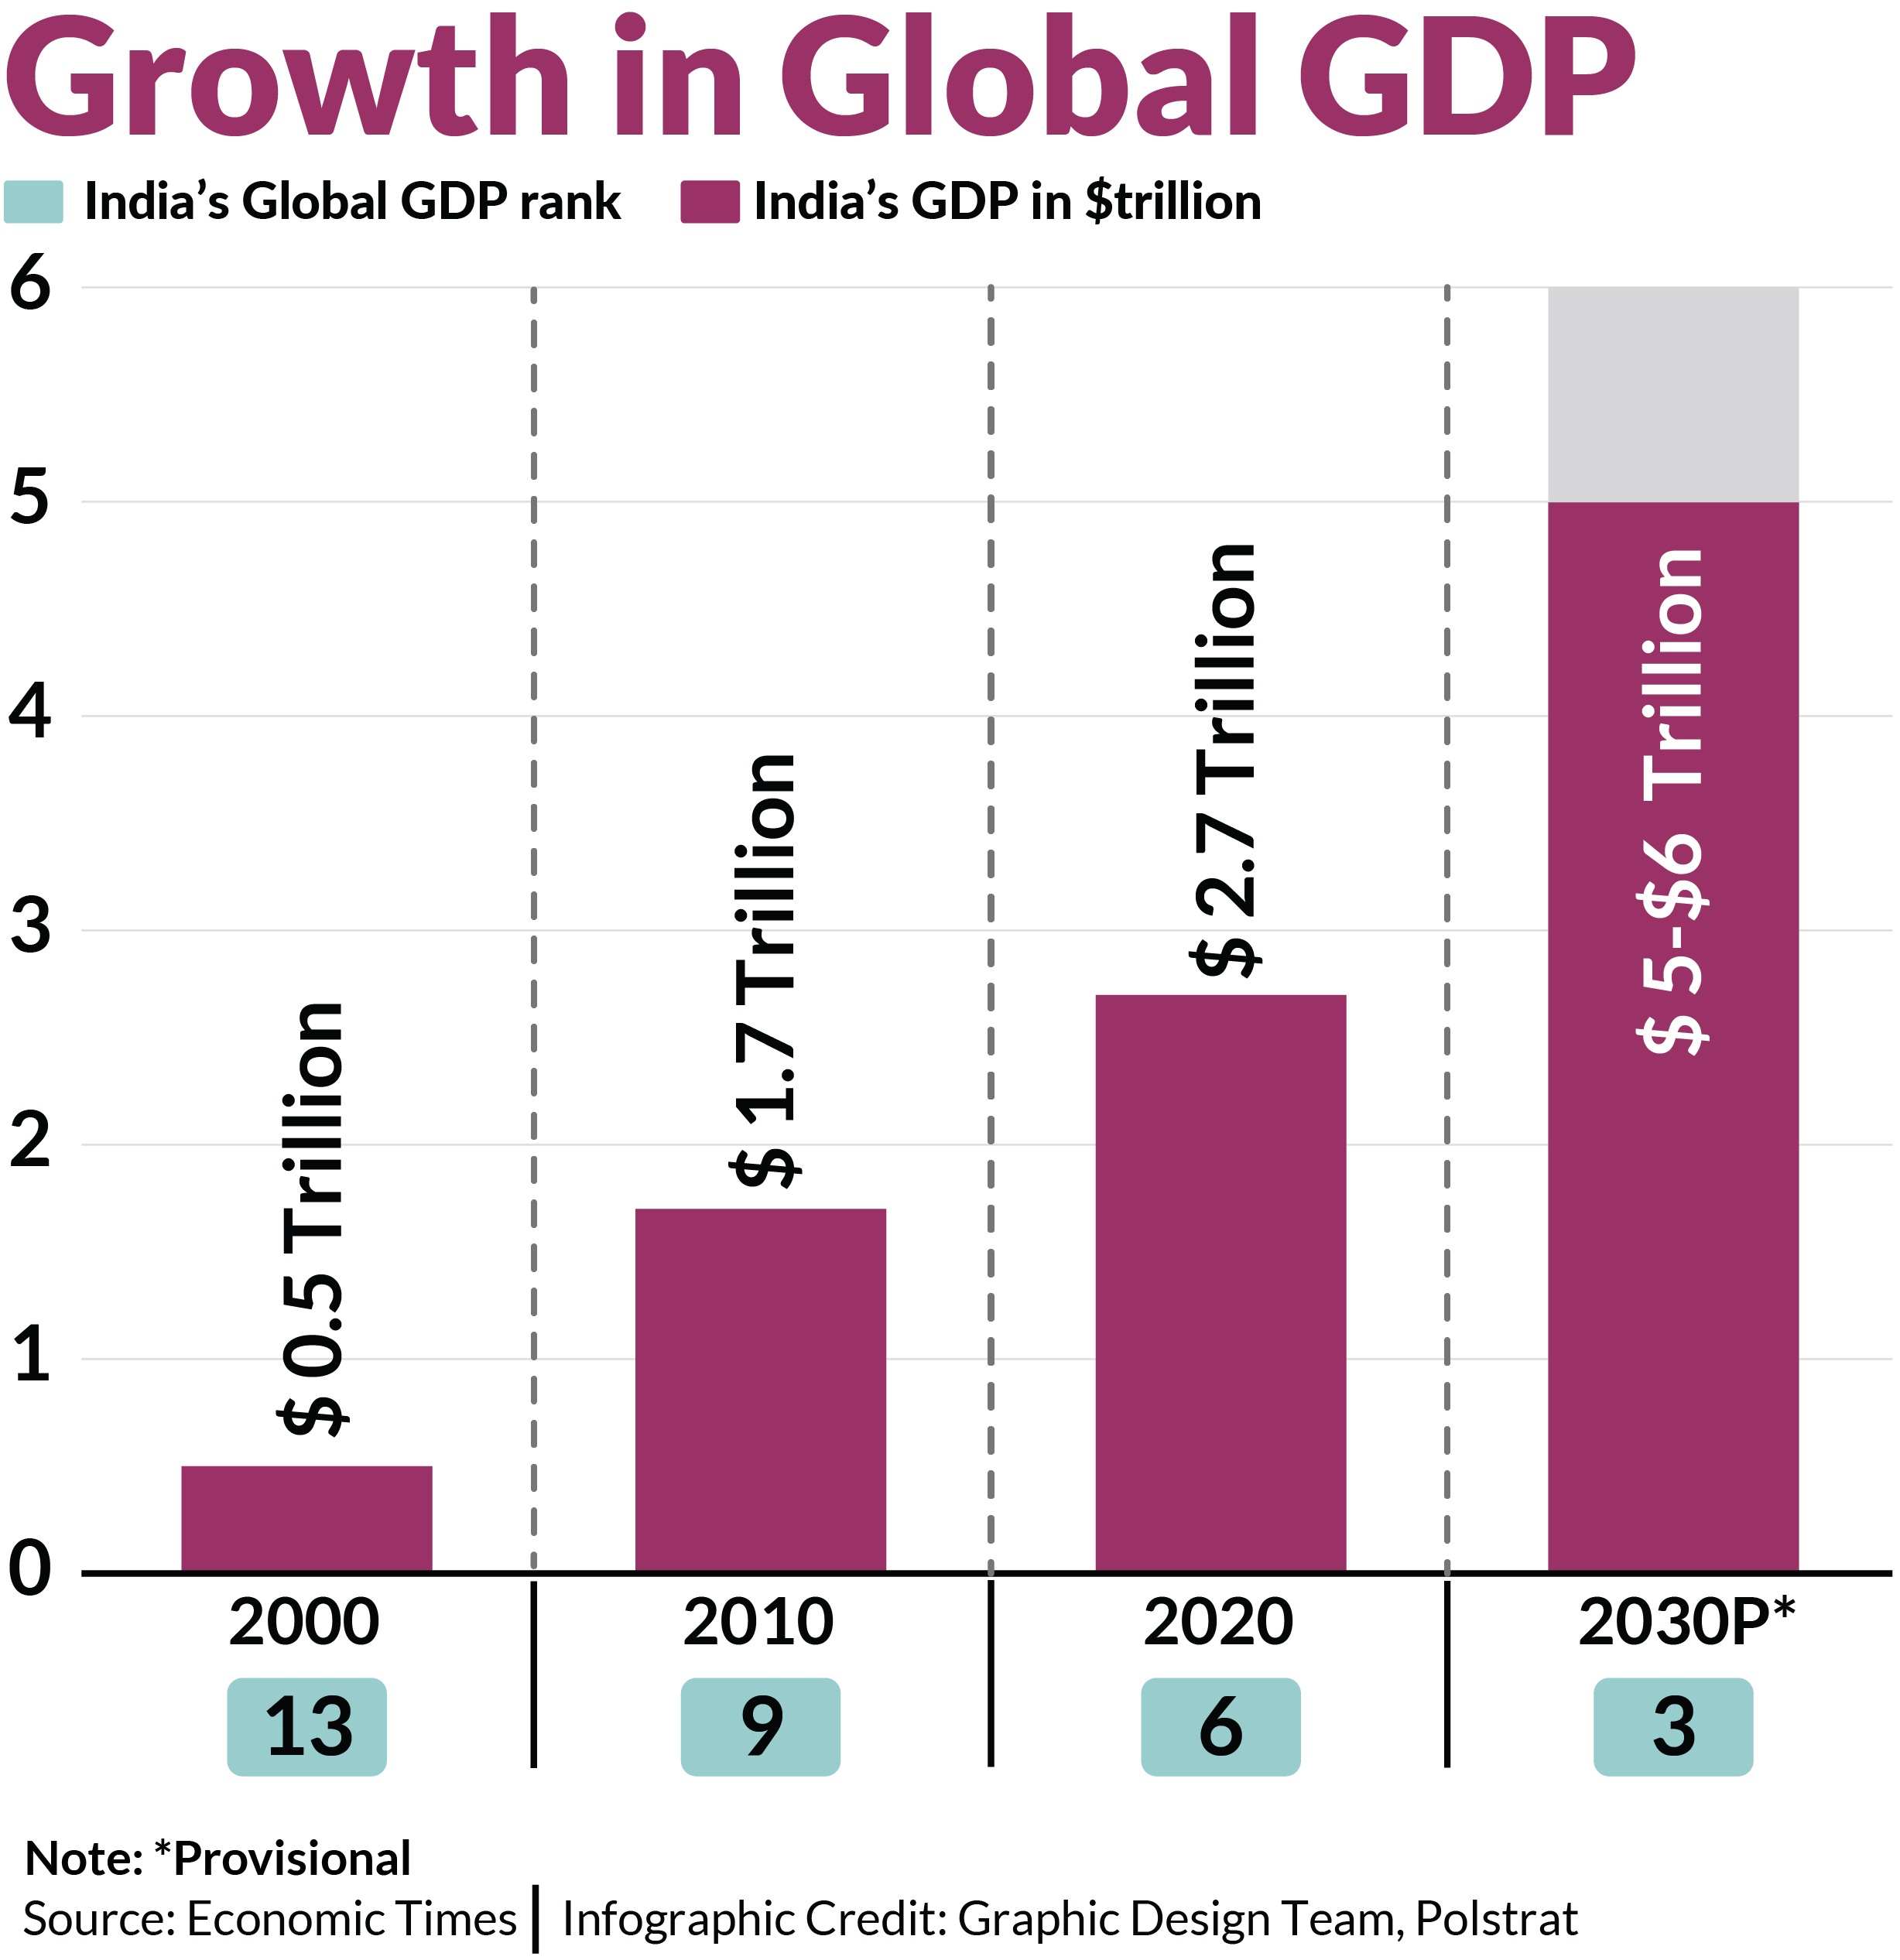 Is India Inc. the “bright spot” in the global economic slowdown?